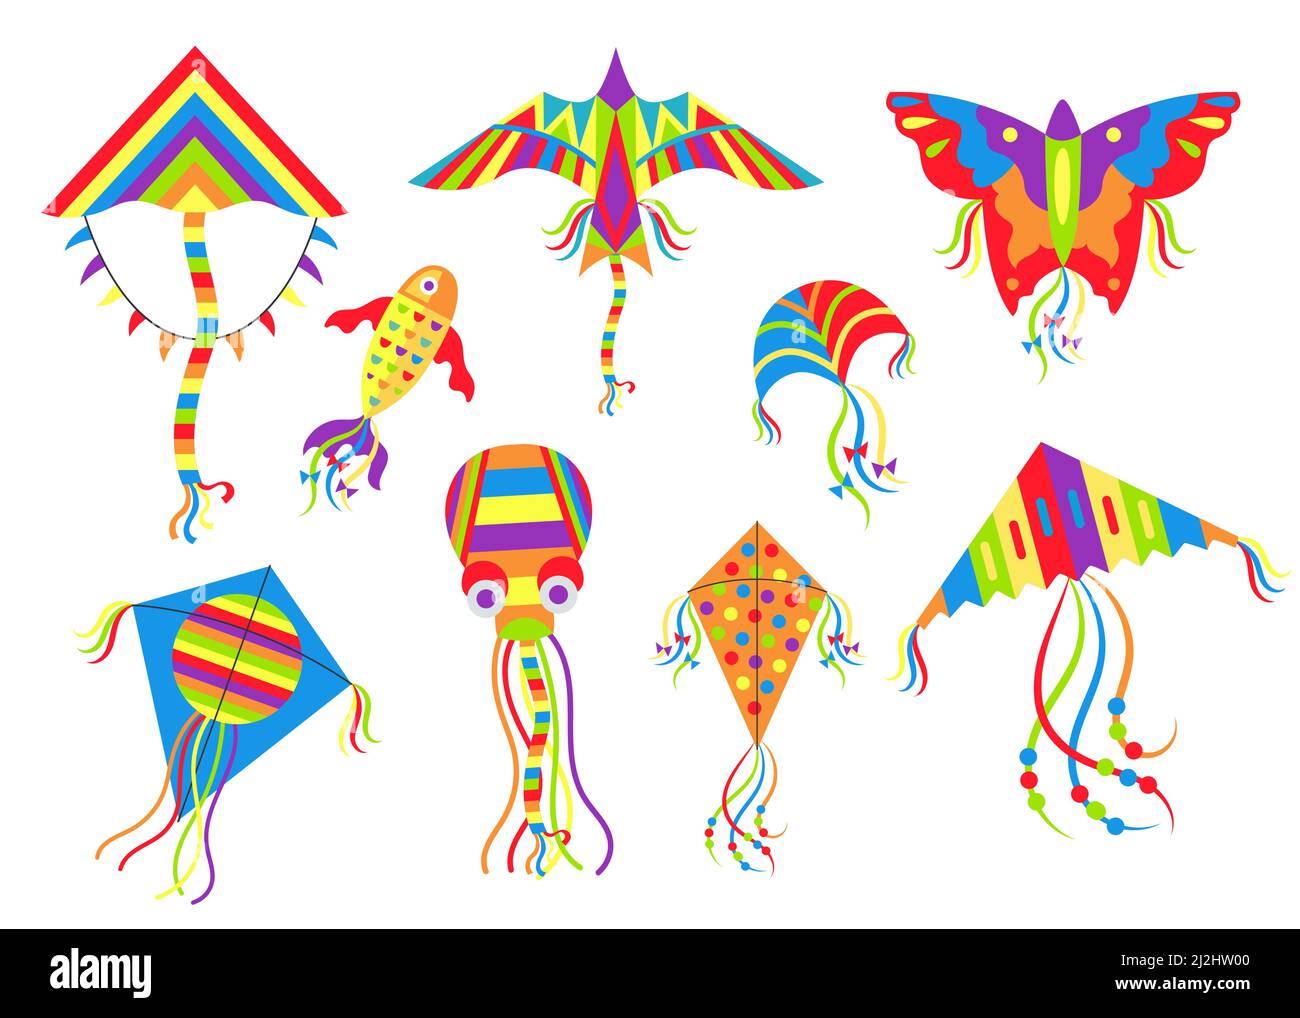 Kites of different types vector illustrations set. Designs of flying wind toys on string of different shapes for kids: butterfly, squid, fish isolated Stock Vector